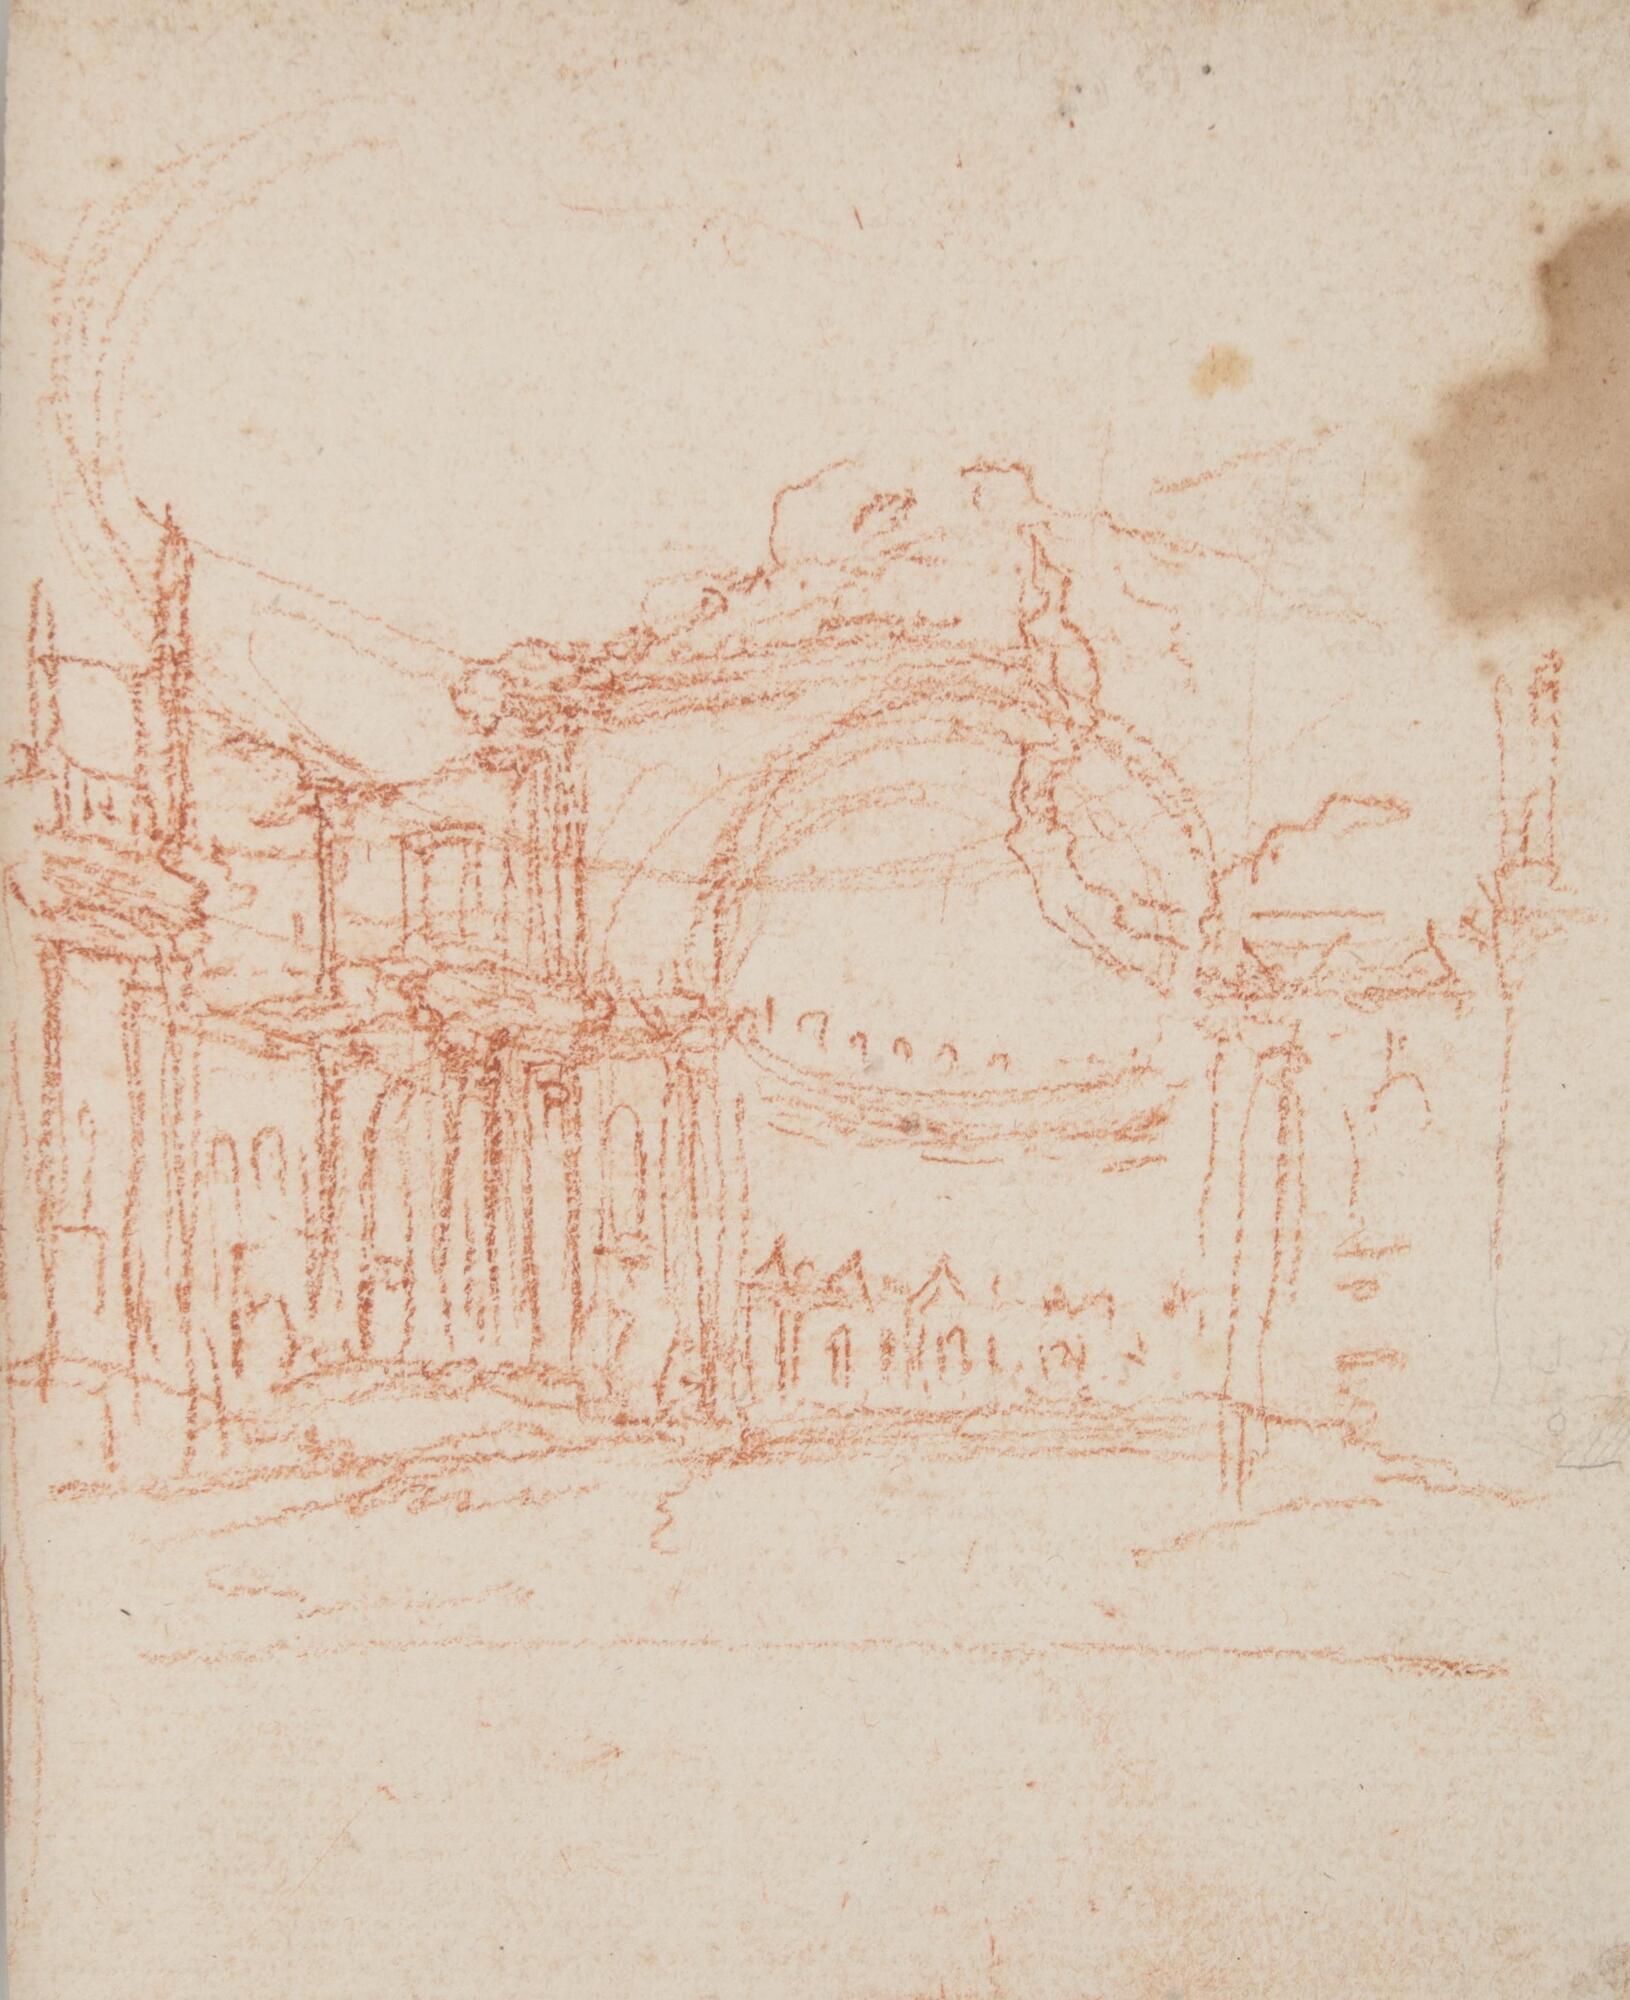 A sketch of ancient ruins. At the center is a colonnaded apse that has partially collapsed. To the left, there are a series of columns. On the reverse, there is a sketch of a sculpture.